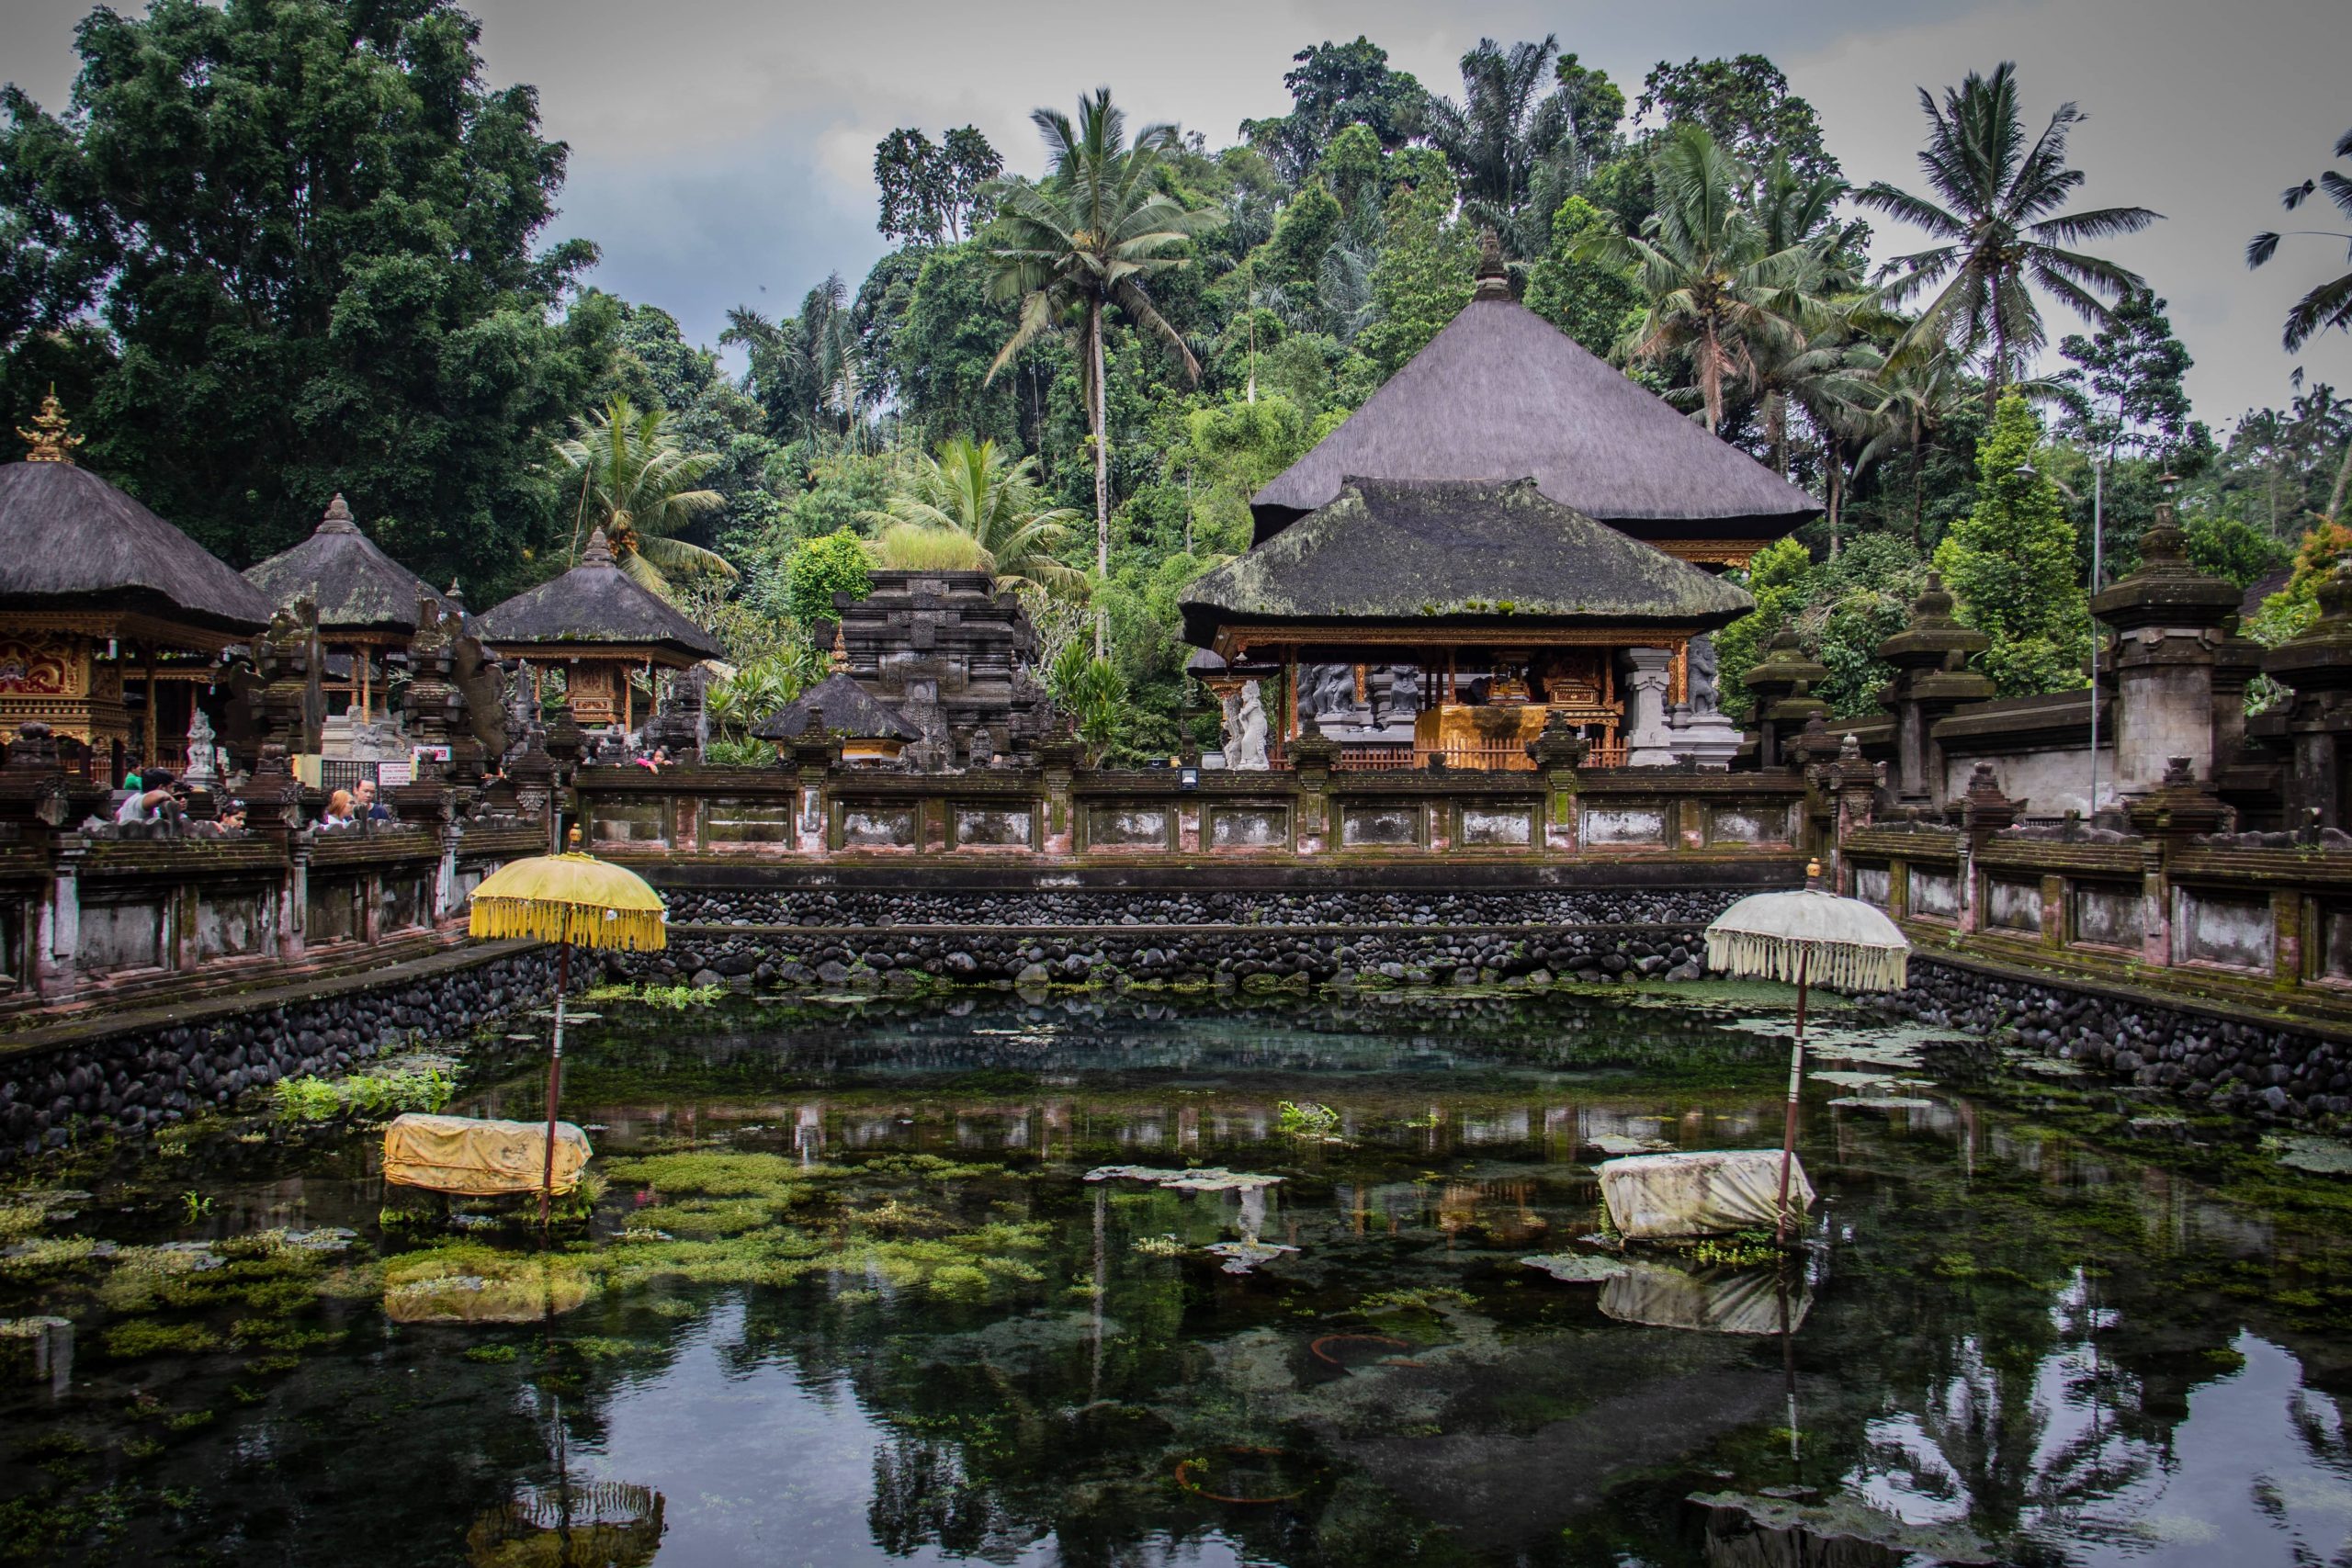 Tirta Empul Temple in Bali, Indonesia on a post about temple etiquette